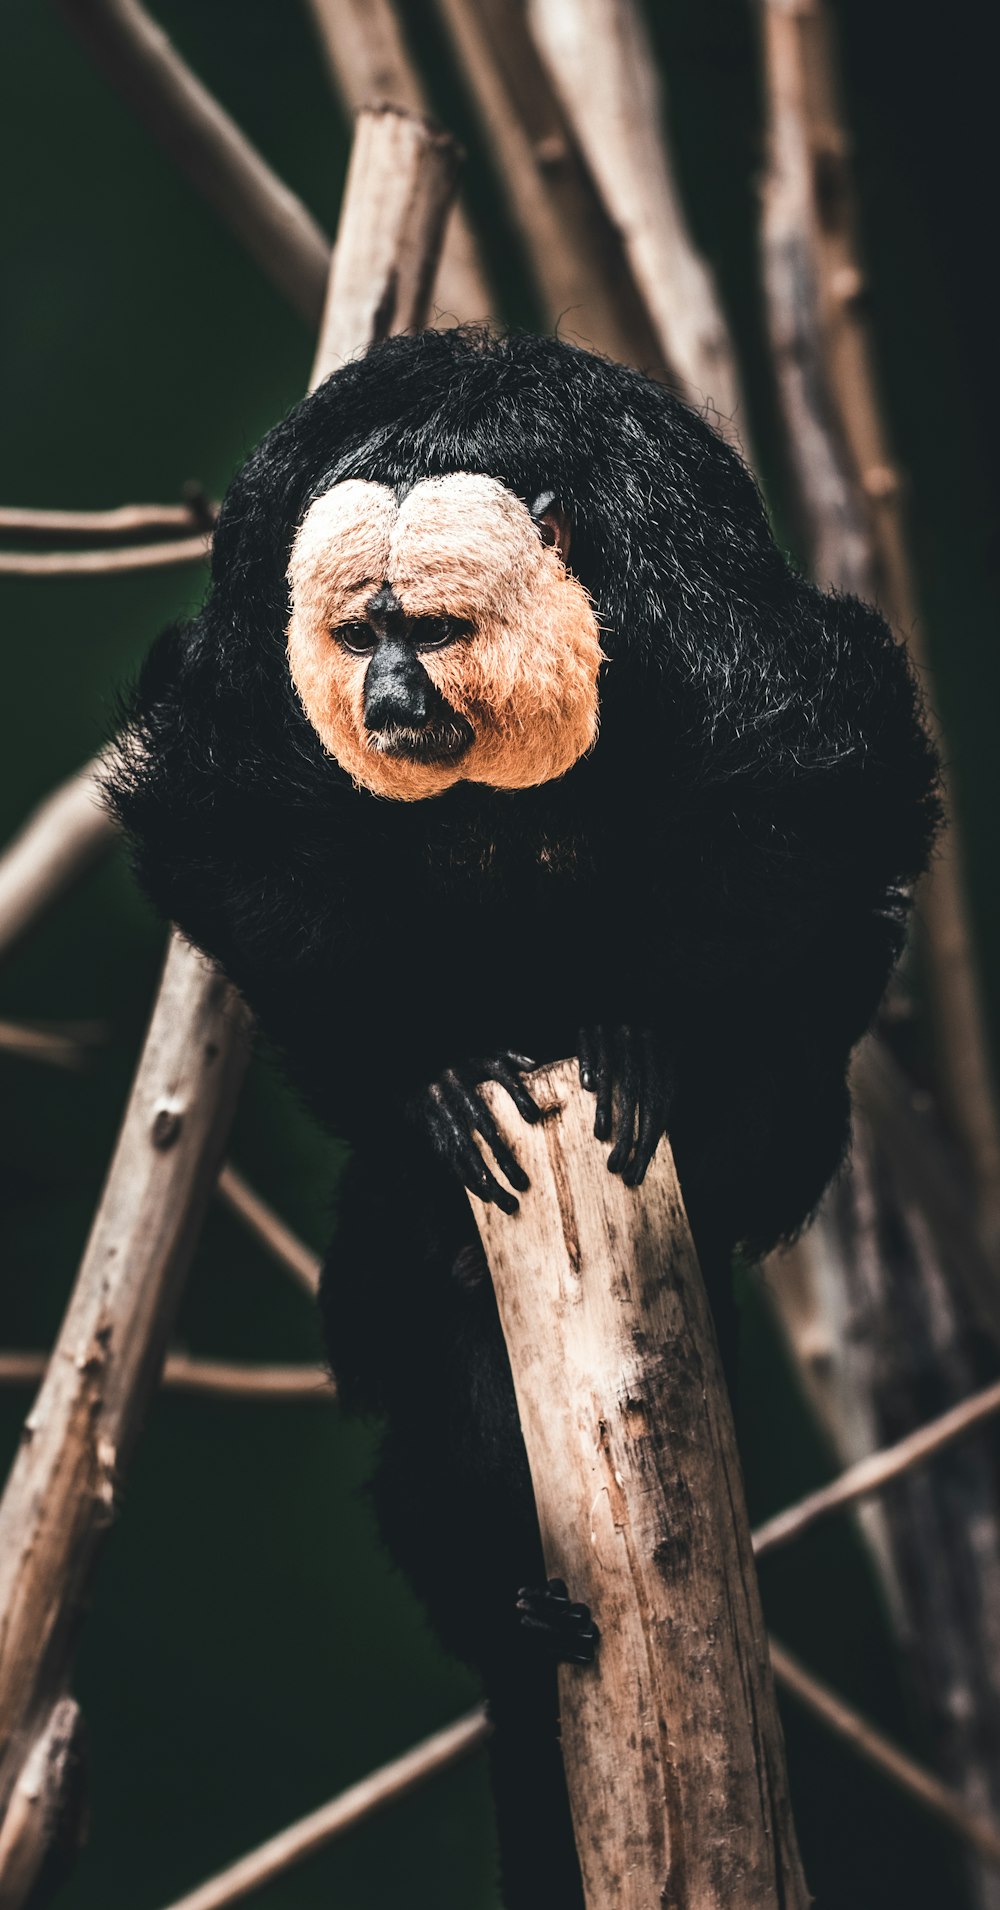 black and brown monkey on brown wooden stick